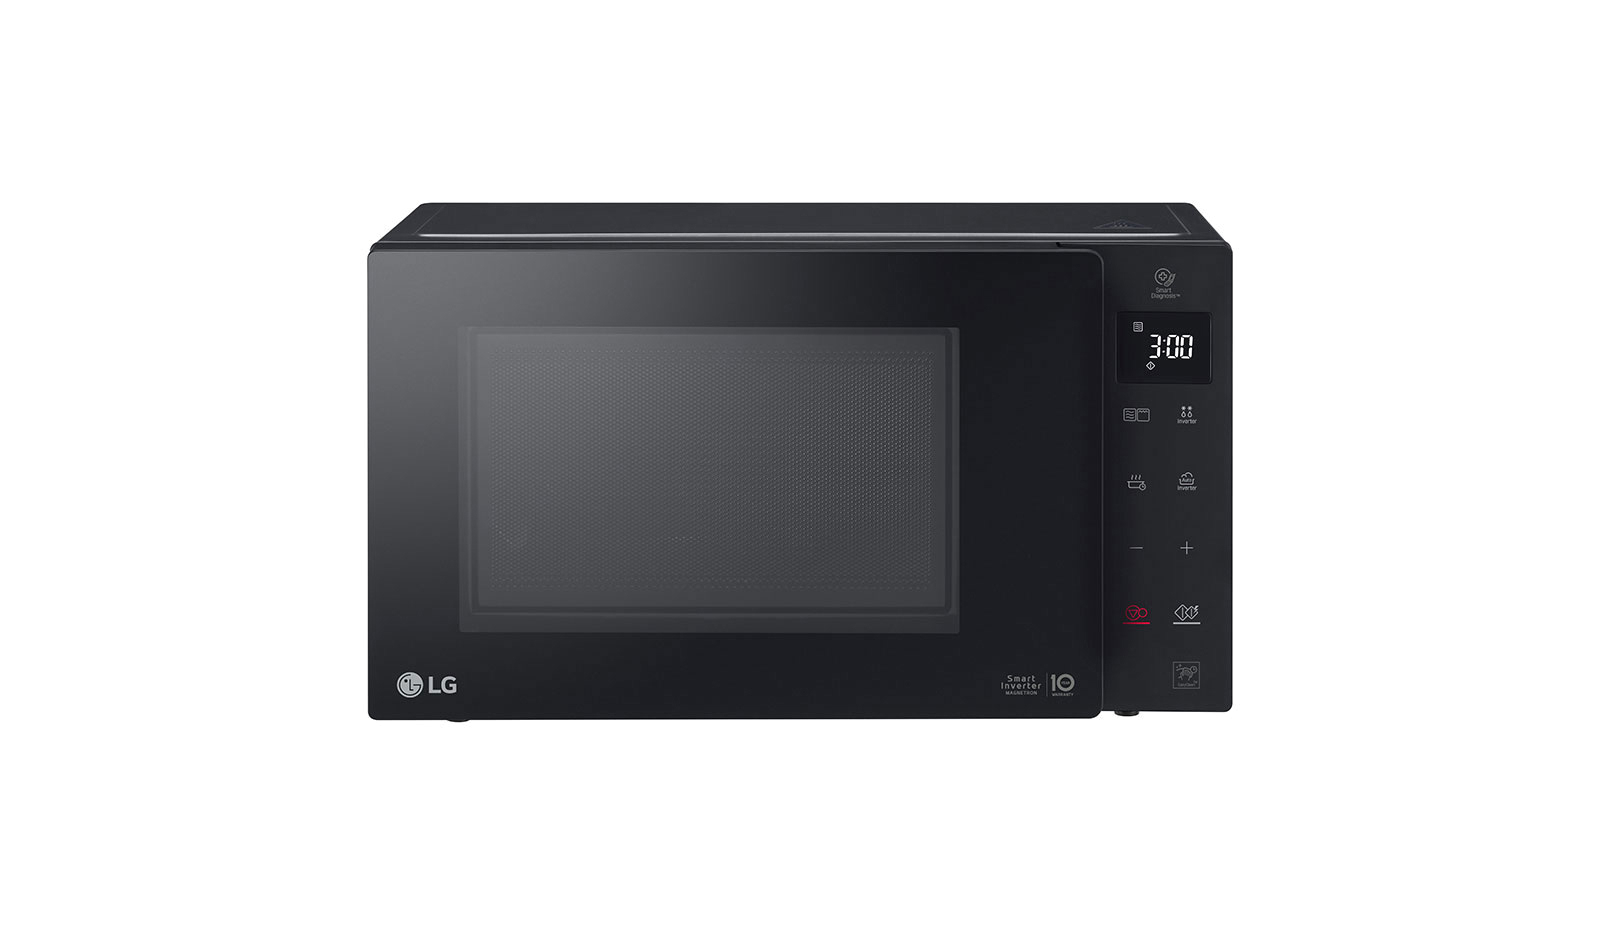 lg mh6336gib microwave oven grill neo chef 23l black